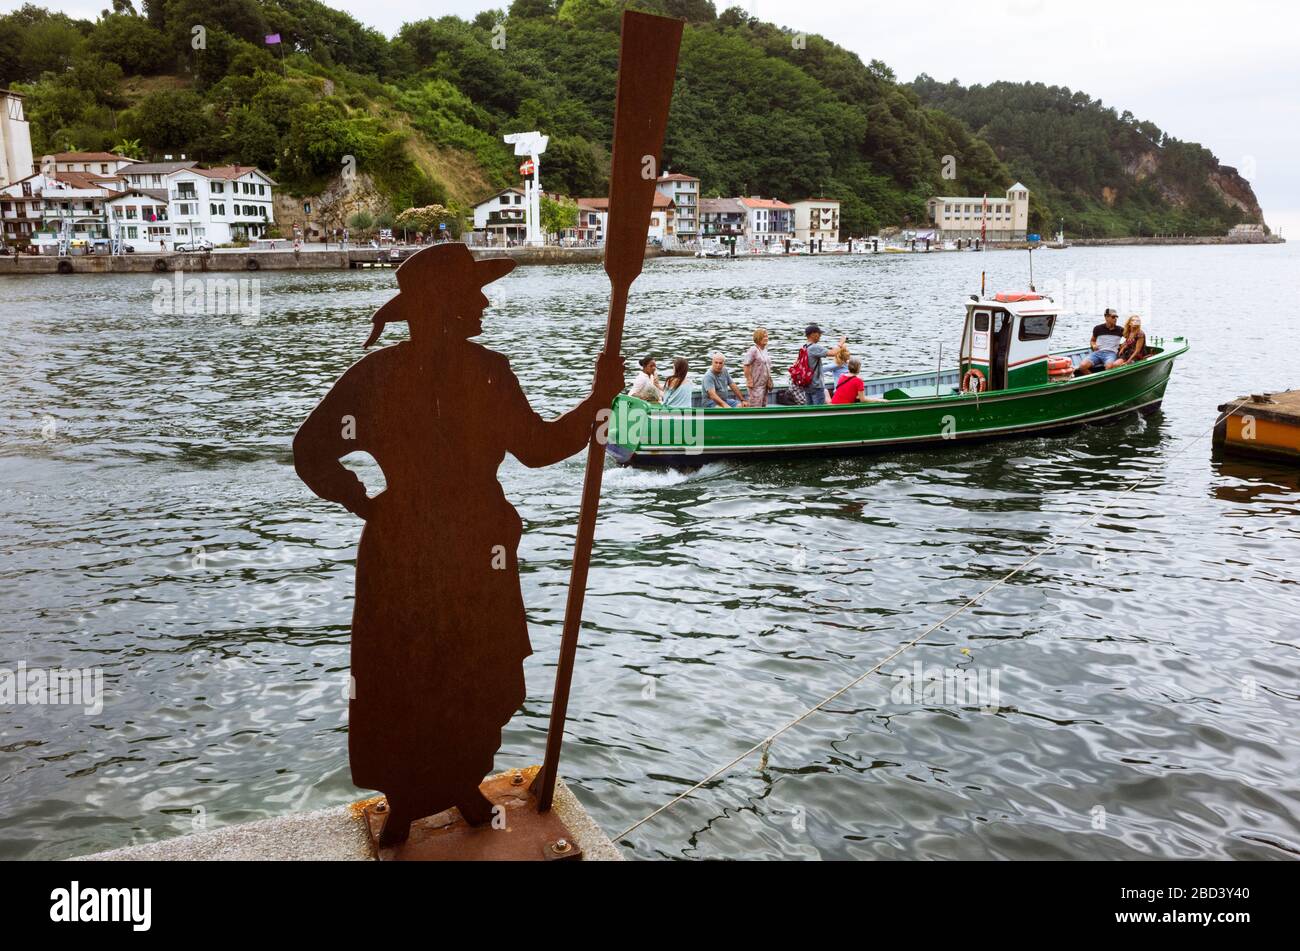 Pasajes, Gipuzkoa, Basque Country, Spain - July 21st, 2019 : Small ferry boat at the pier on the Oyarzun estuary and batelera (boat woman) statue. Inc Stock Photo